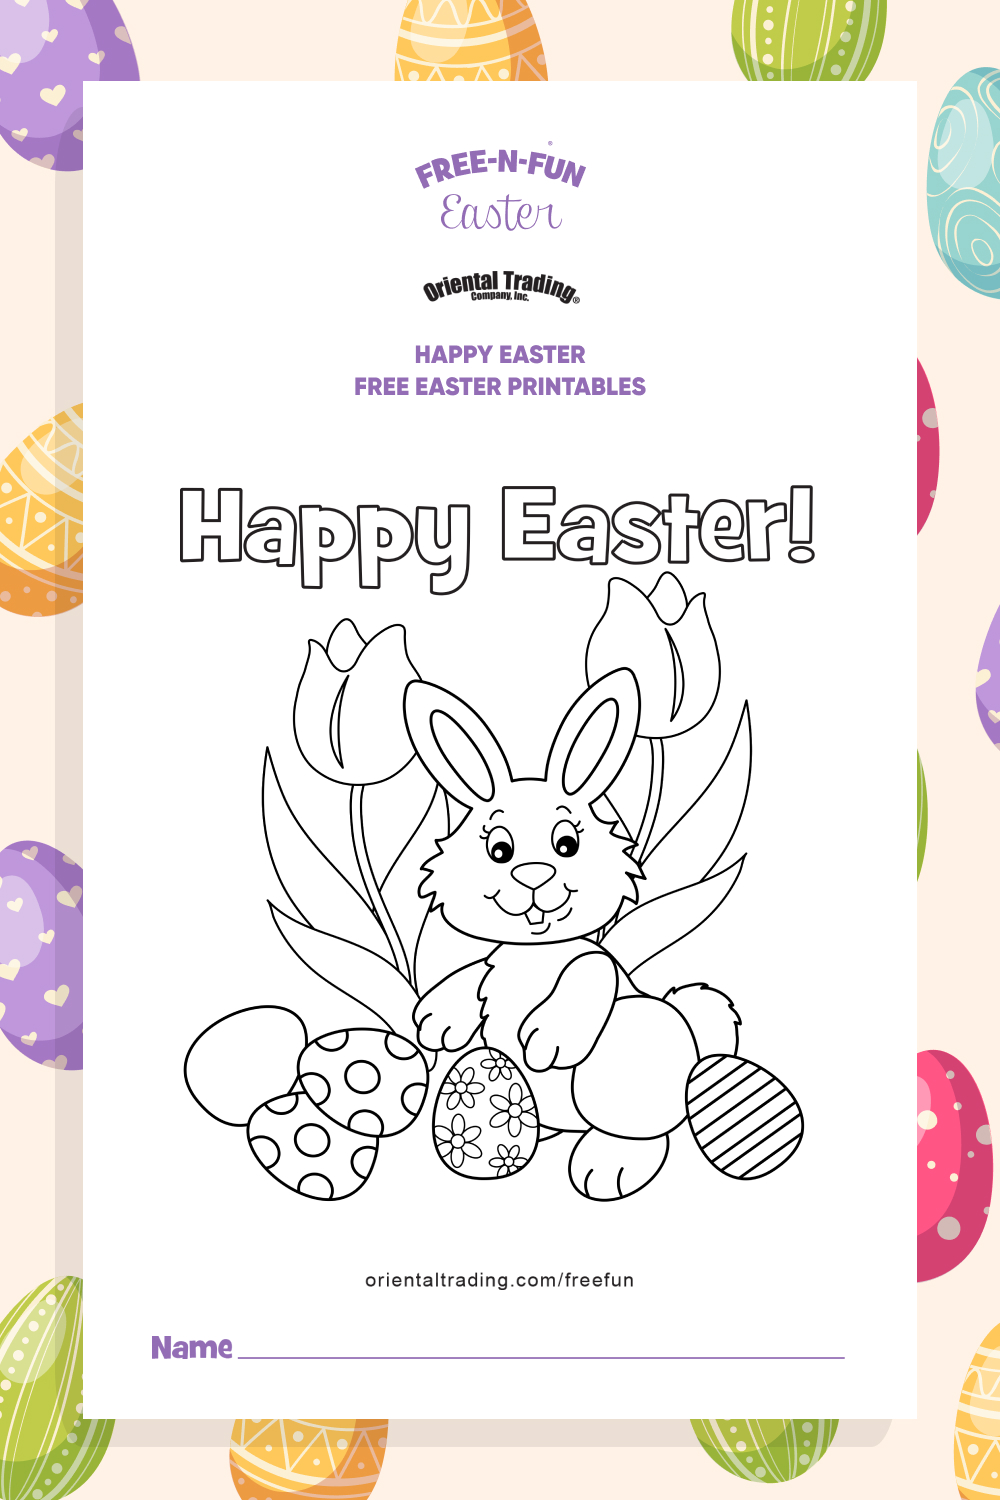 Happy Easter Free Easter Printables pinterest image.